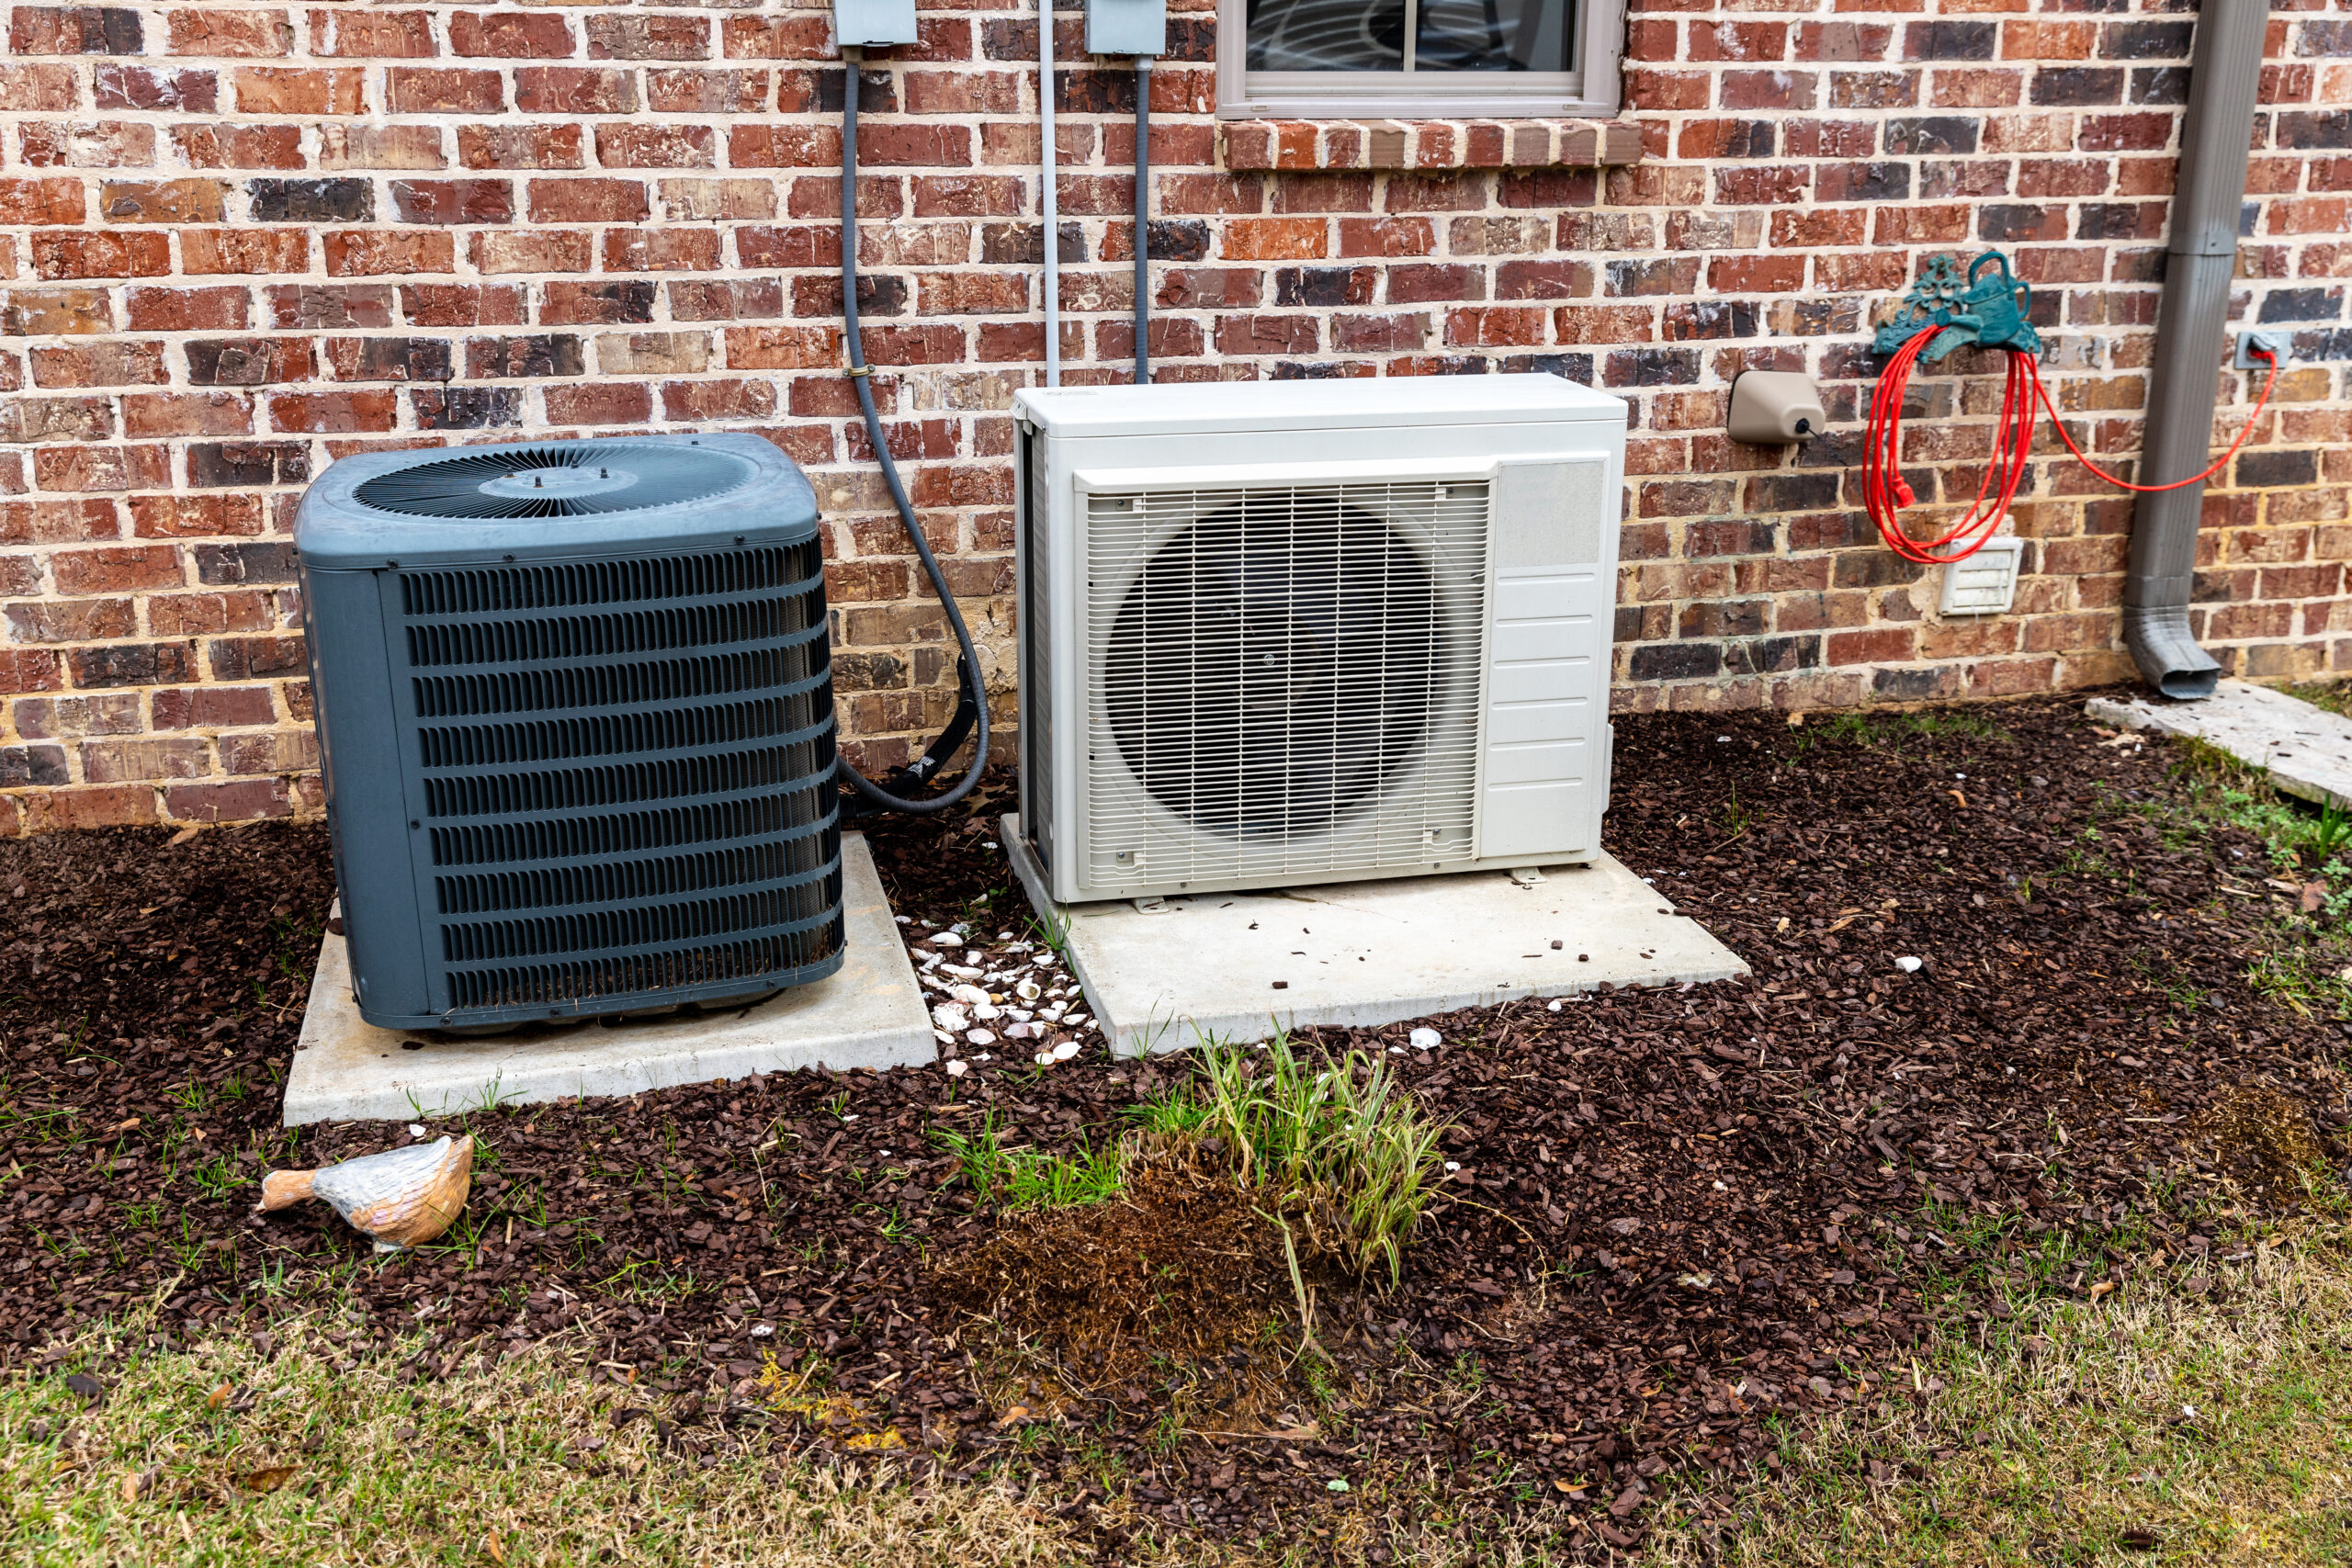 WHAT ARE THE DIFFERENT TYPES OF HVAC SYSTEMS?